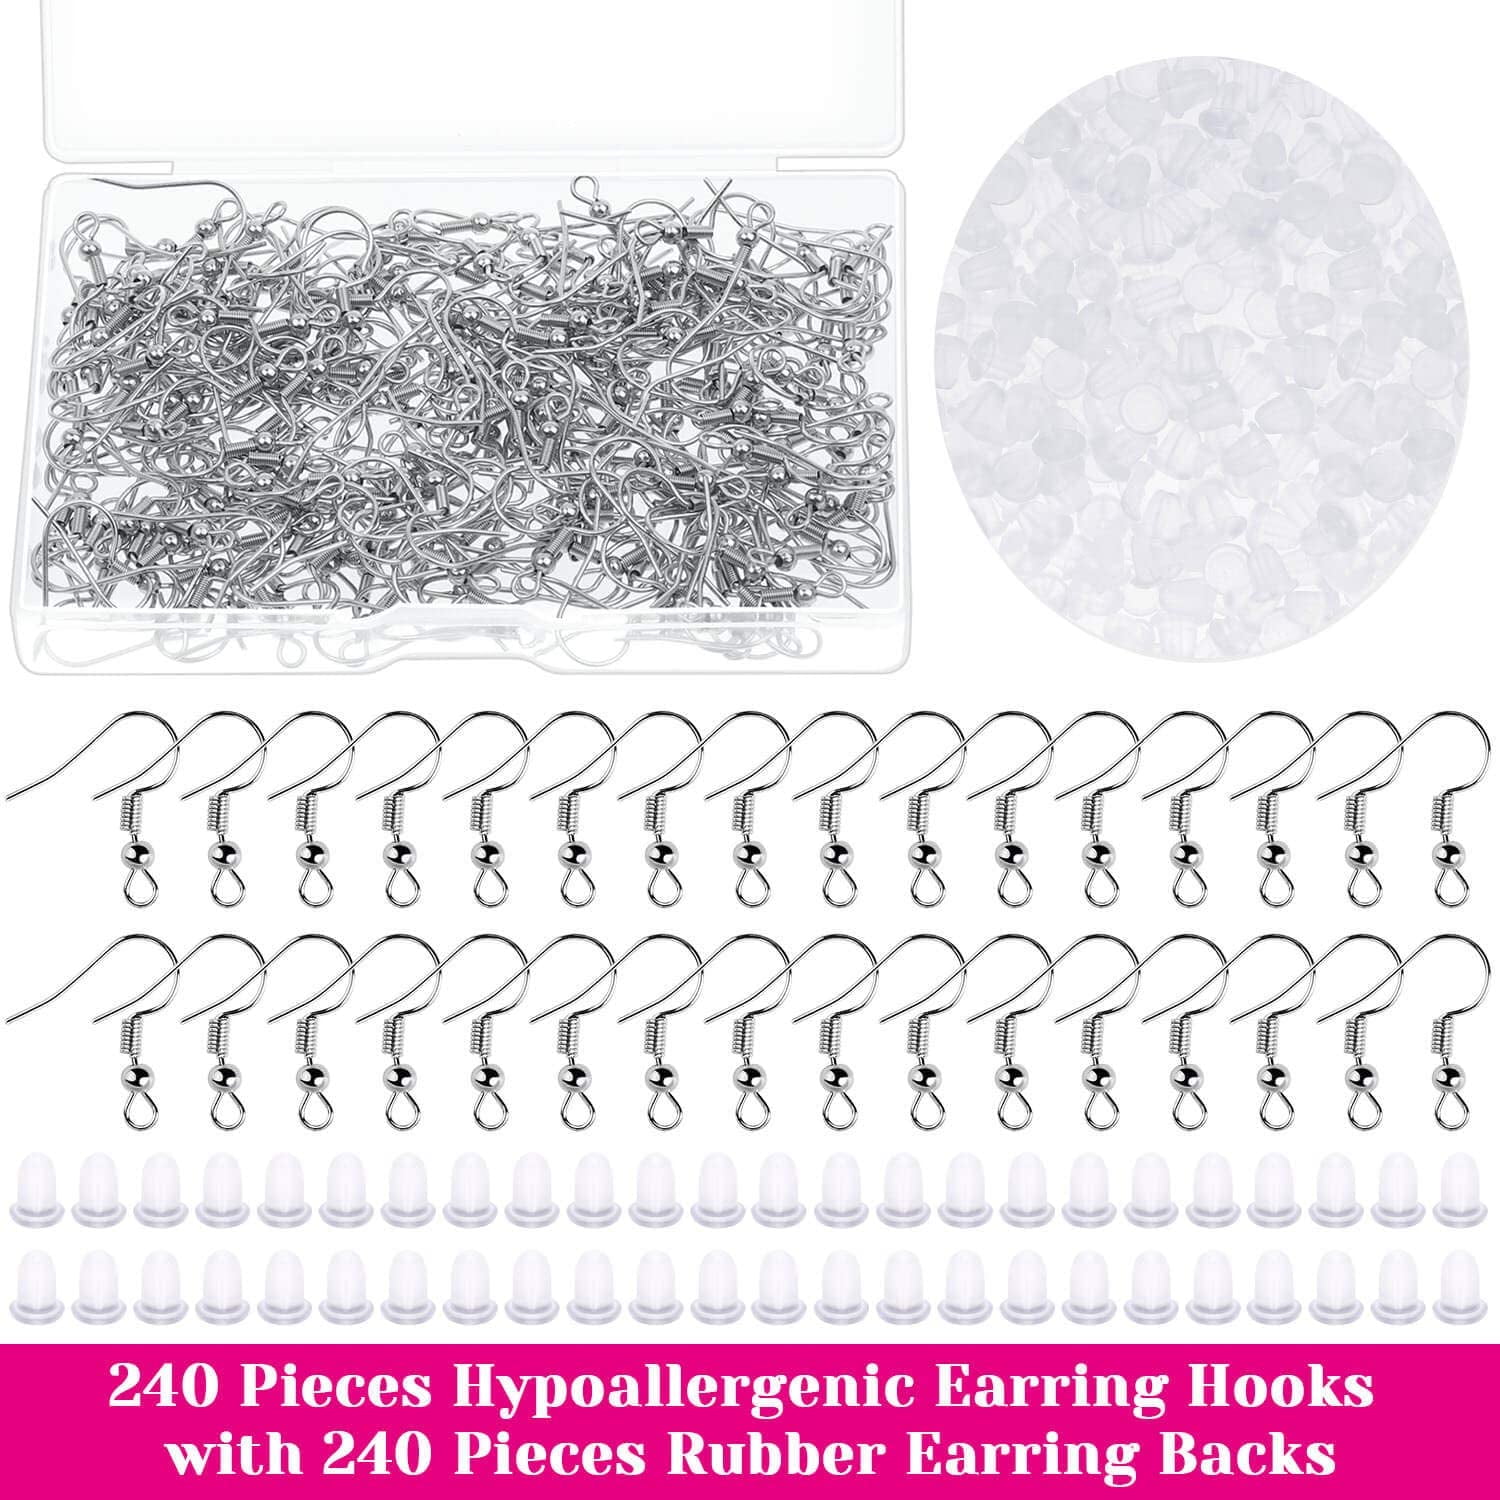 Earring Hooks for Jewelry Making Supplies, Cridoz 240pcs Hypoallergenic  Earing Fish Hooks Stainless Steel Earing Hooks Kit with 240pcs Earring  Backs for Jewelry Earring Making Supplies 